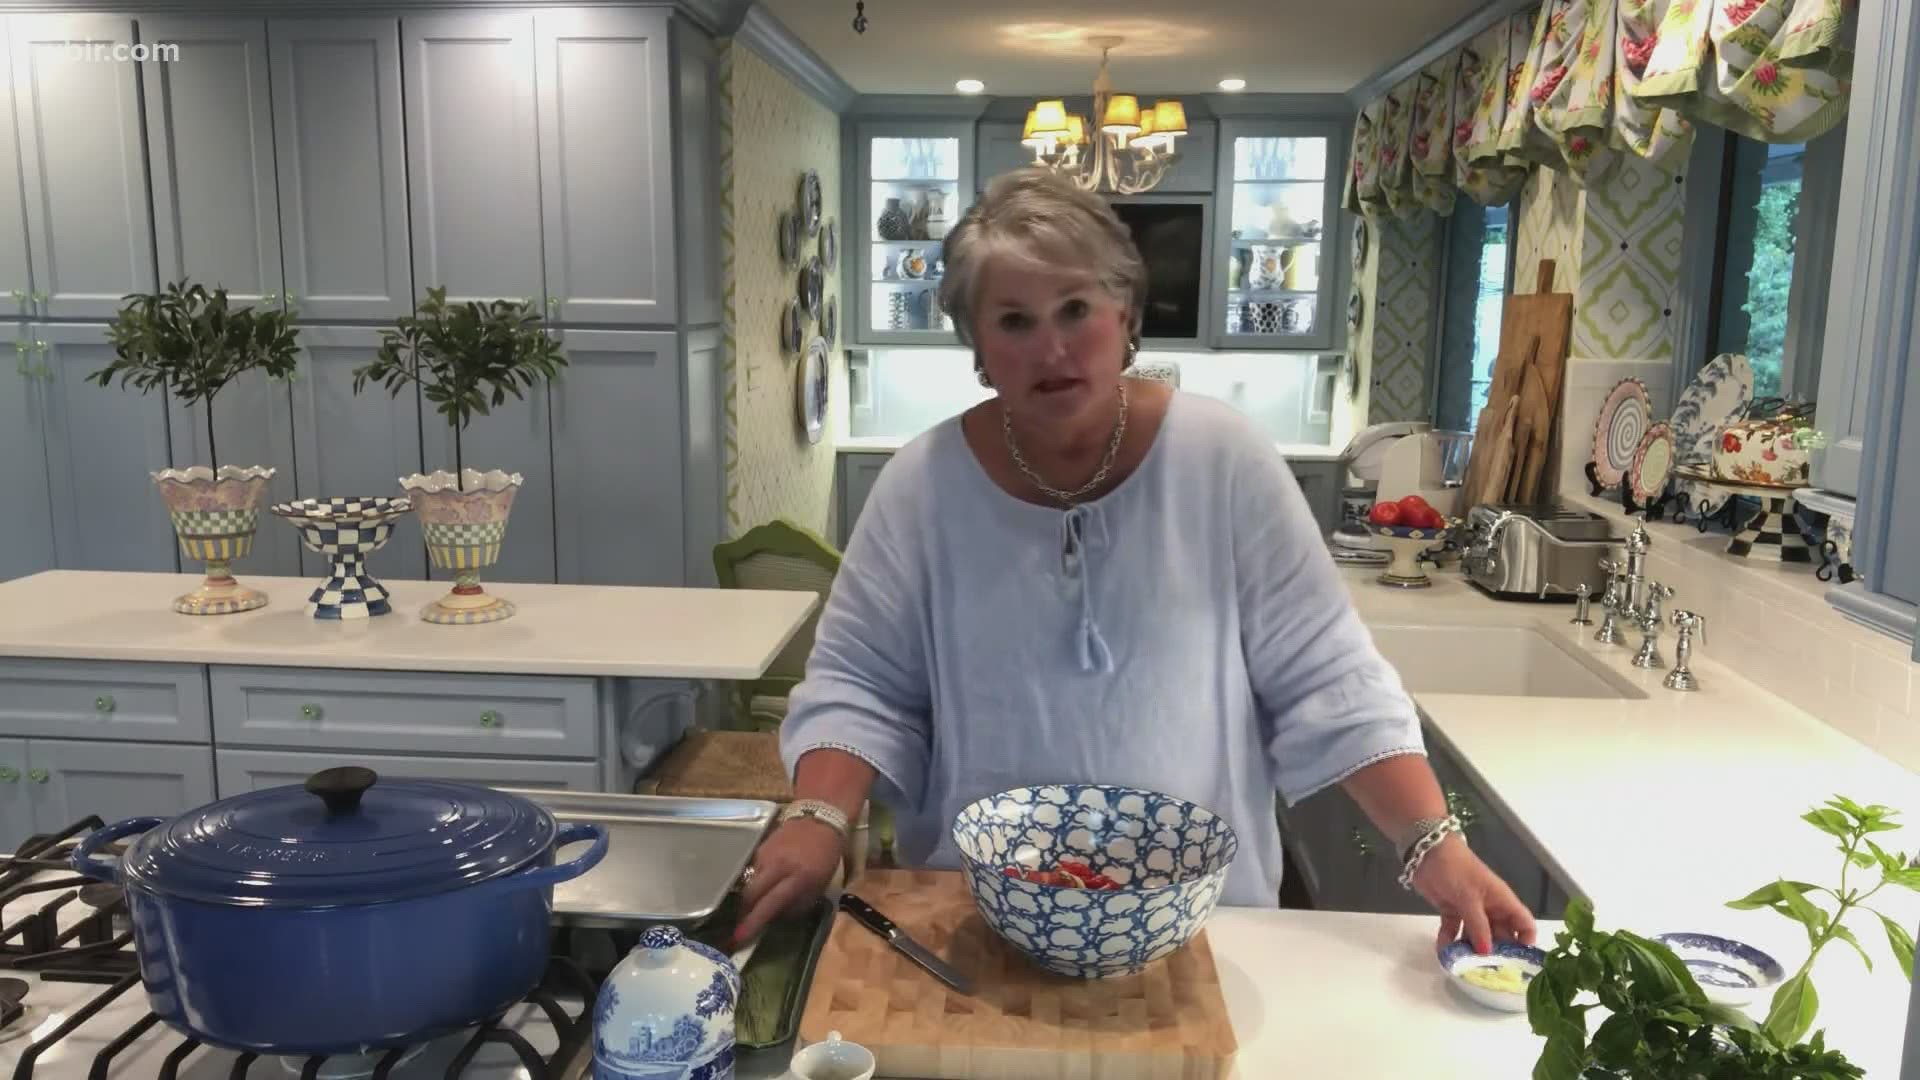 Joy McCabe shares a recipe for Roasted Cherry Tomatoes. Get more of her recipes at joymccabe.com. July 21, 2020-4pm.